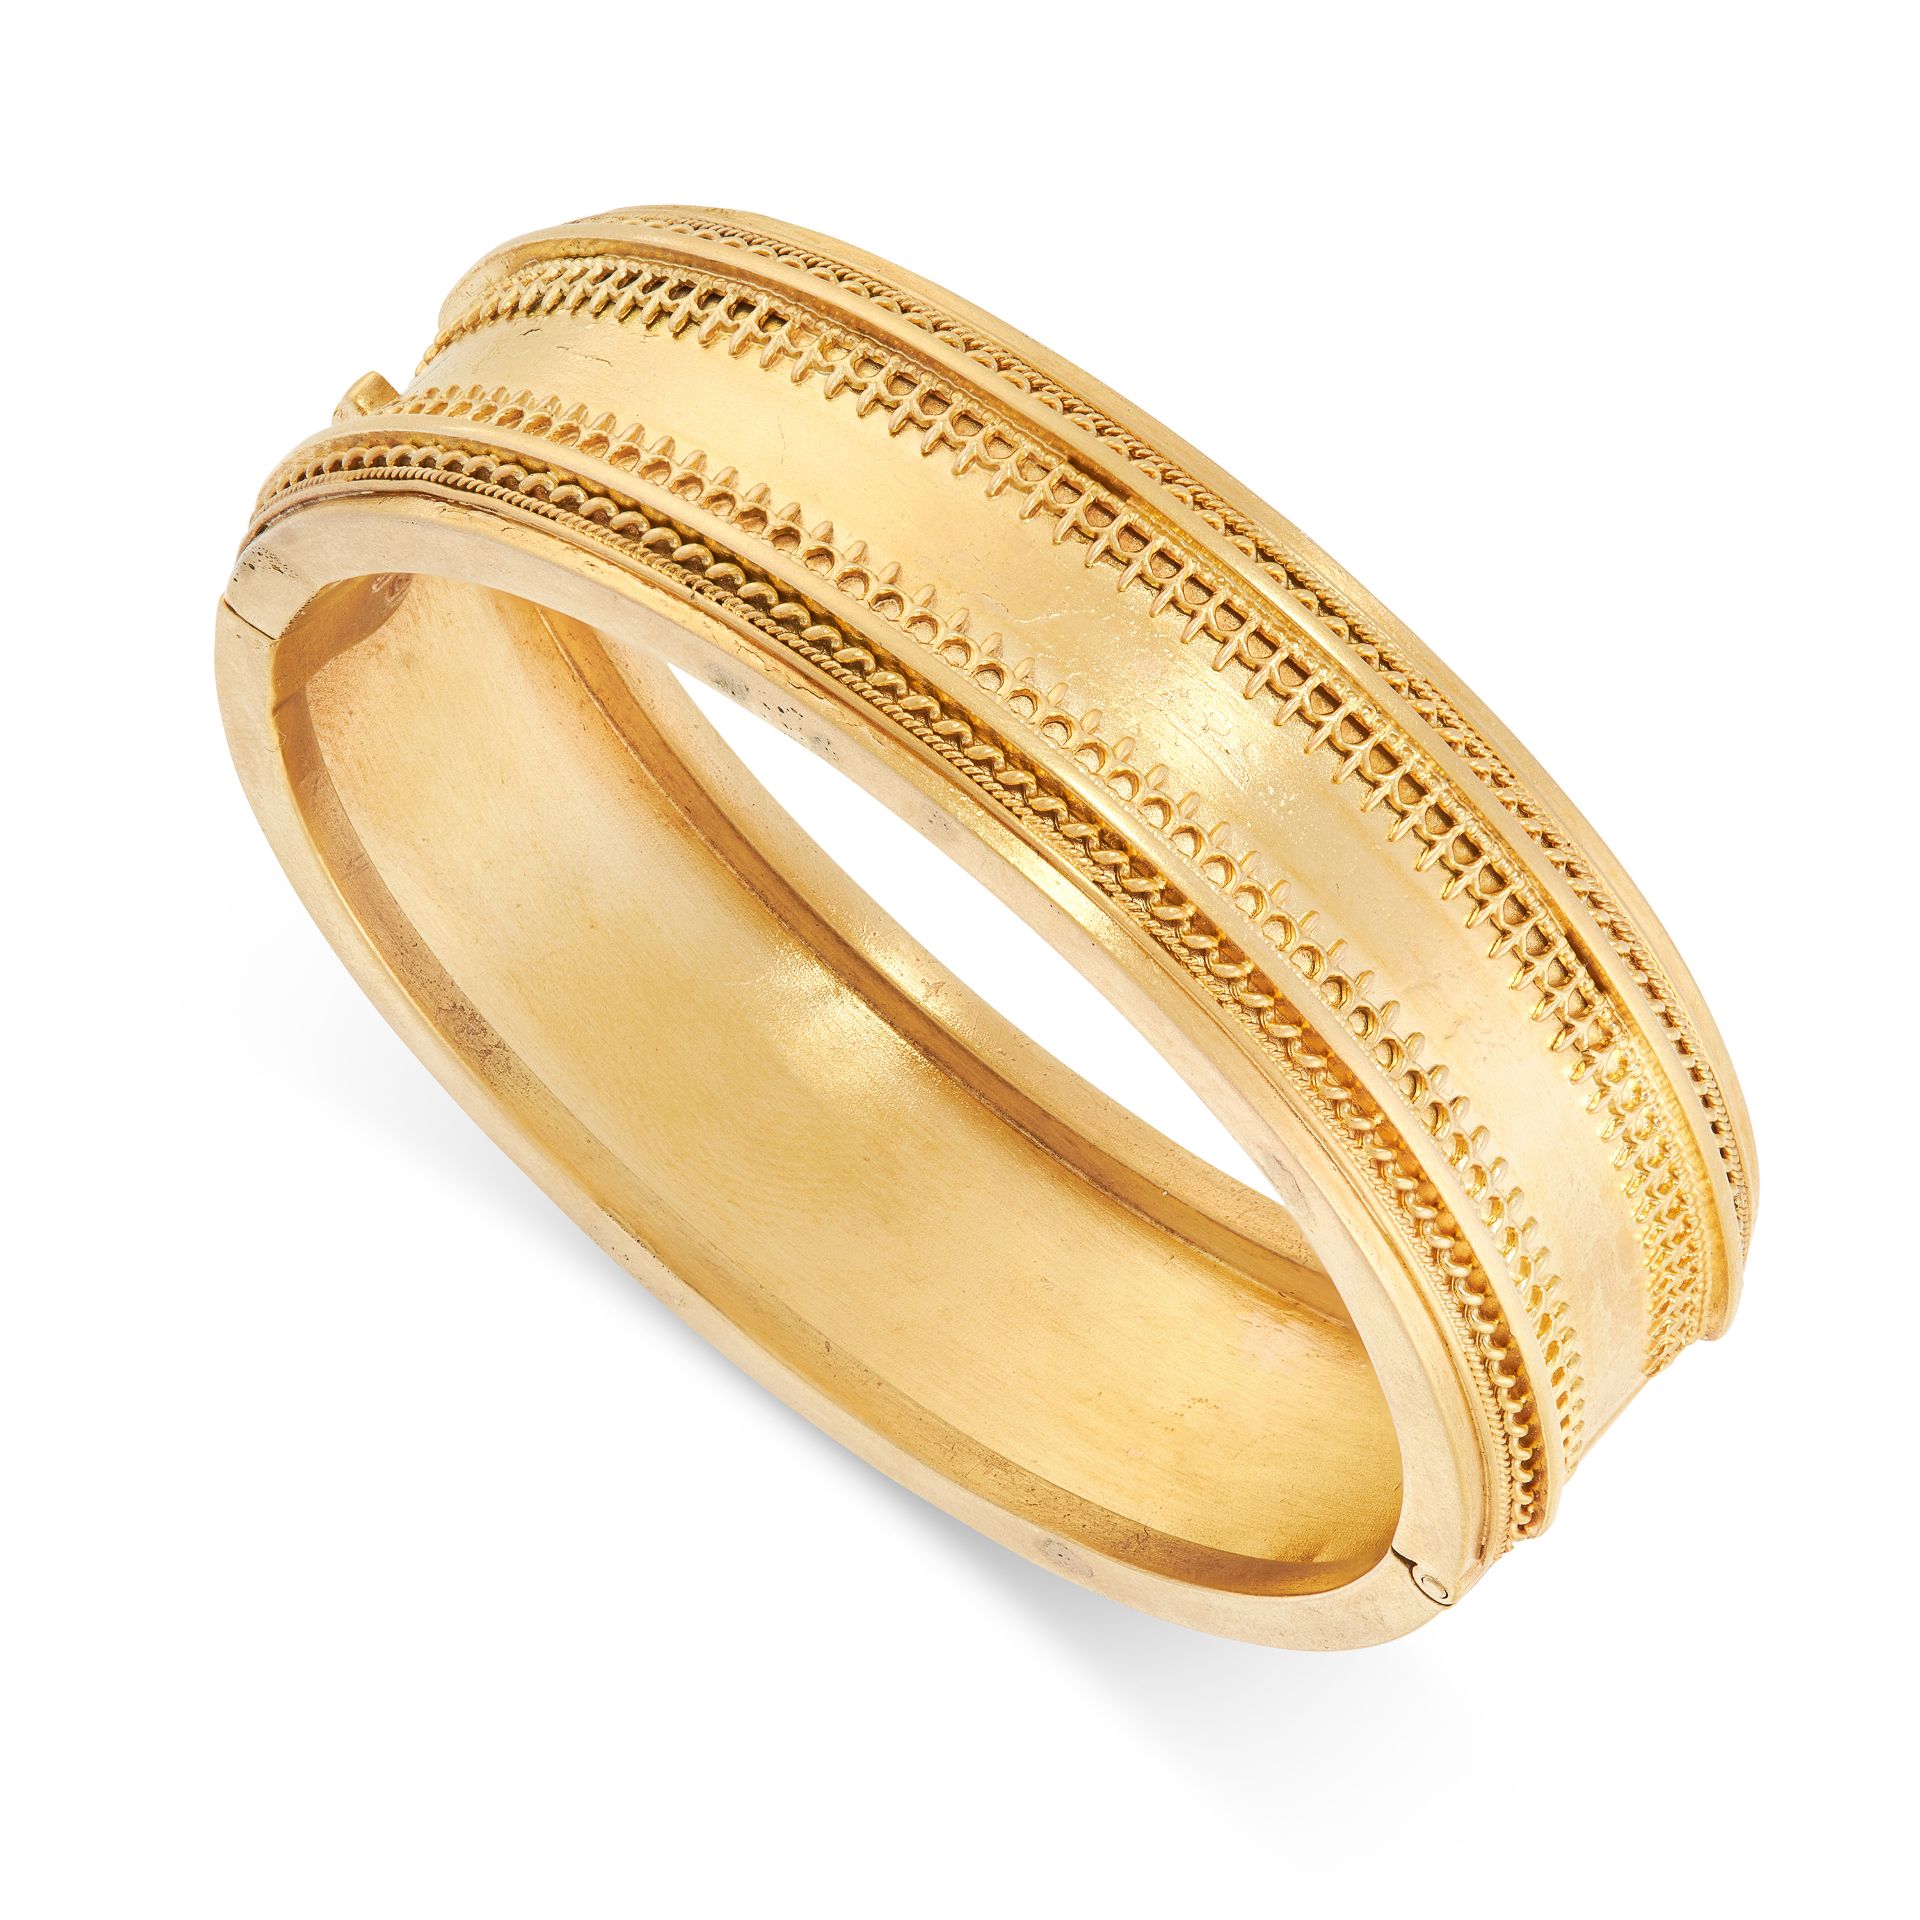 AN ANTIQUE CUFF BANGLE, 19TH CENTURY in 15ct yellow gold, the body embellished with bands of applied